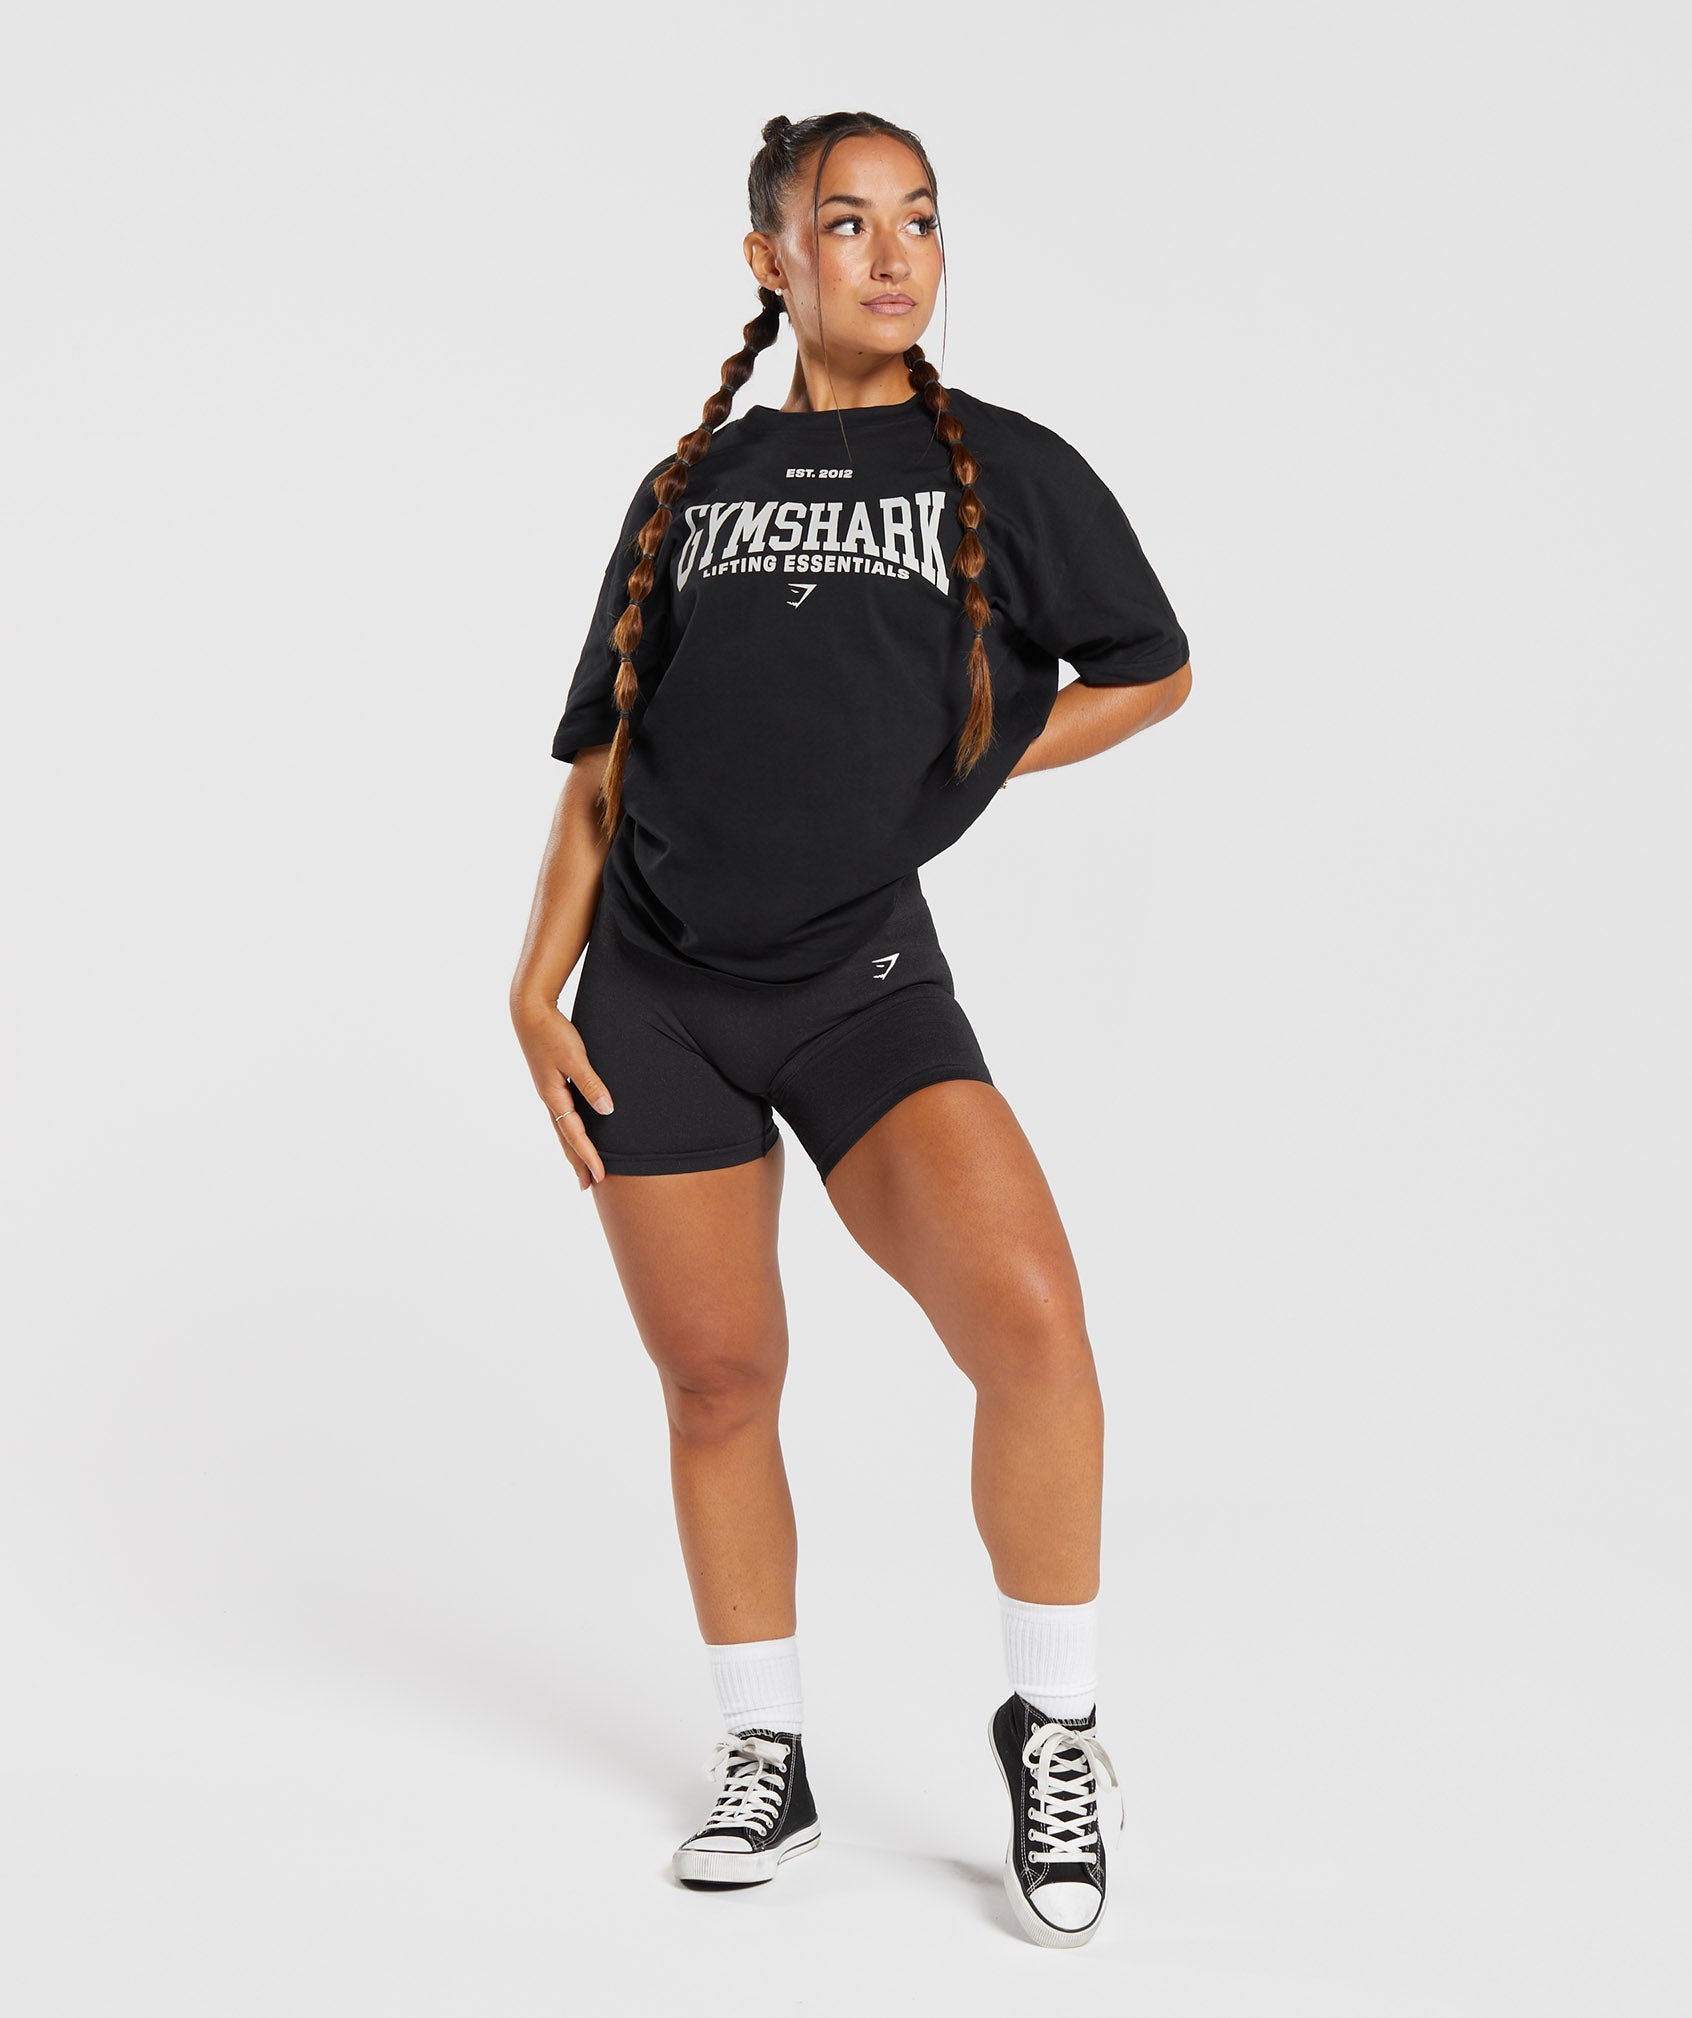 Lifting Essentials Oversized T-shirt in Black - view 4